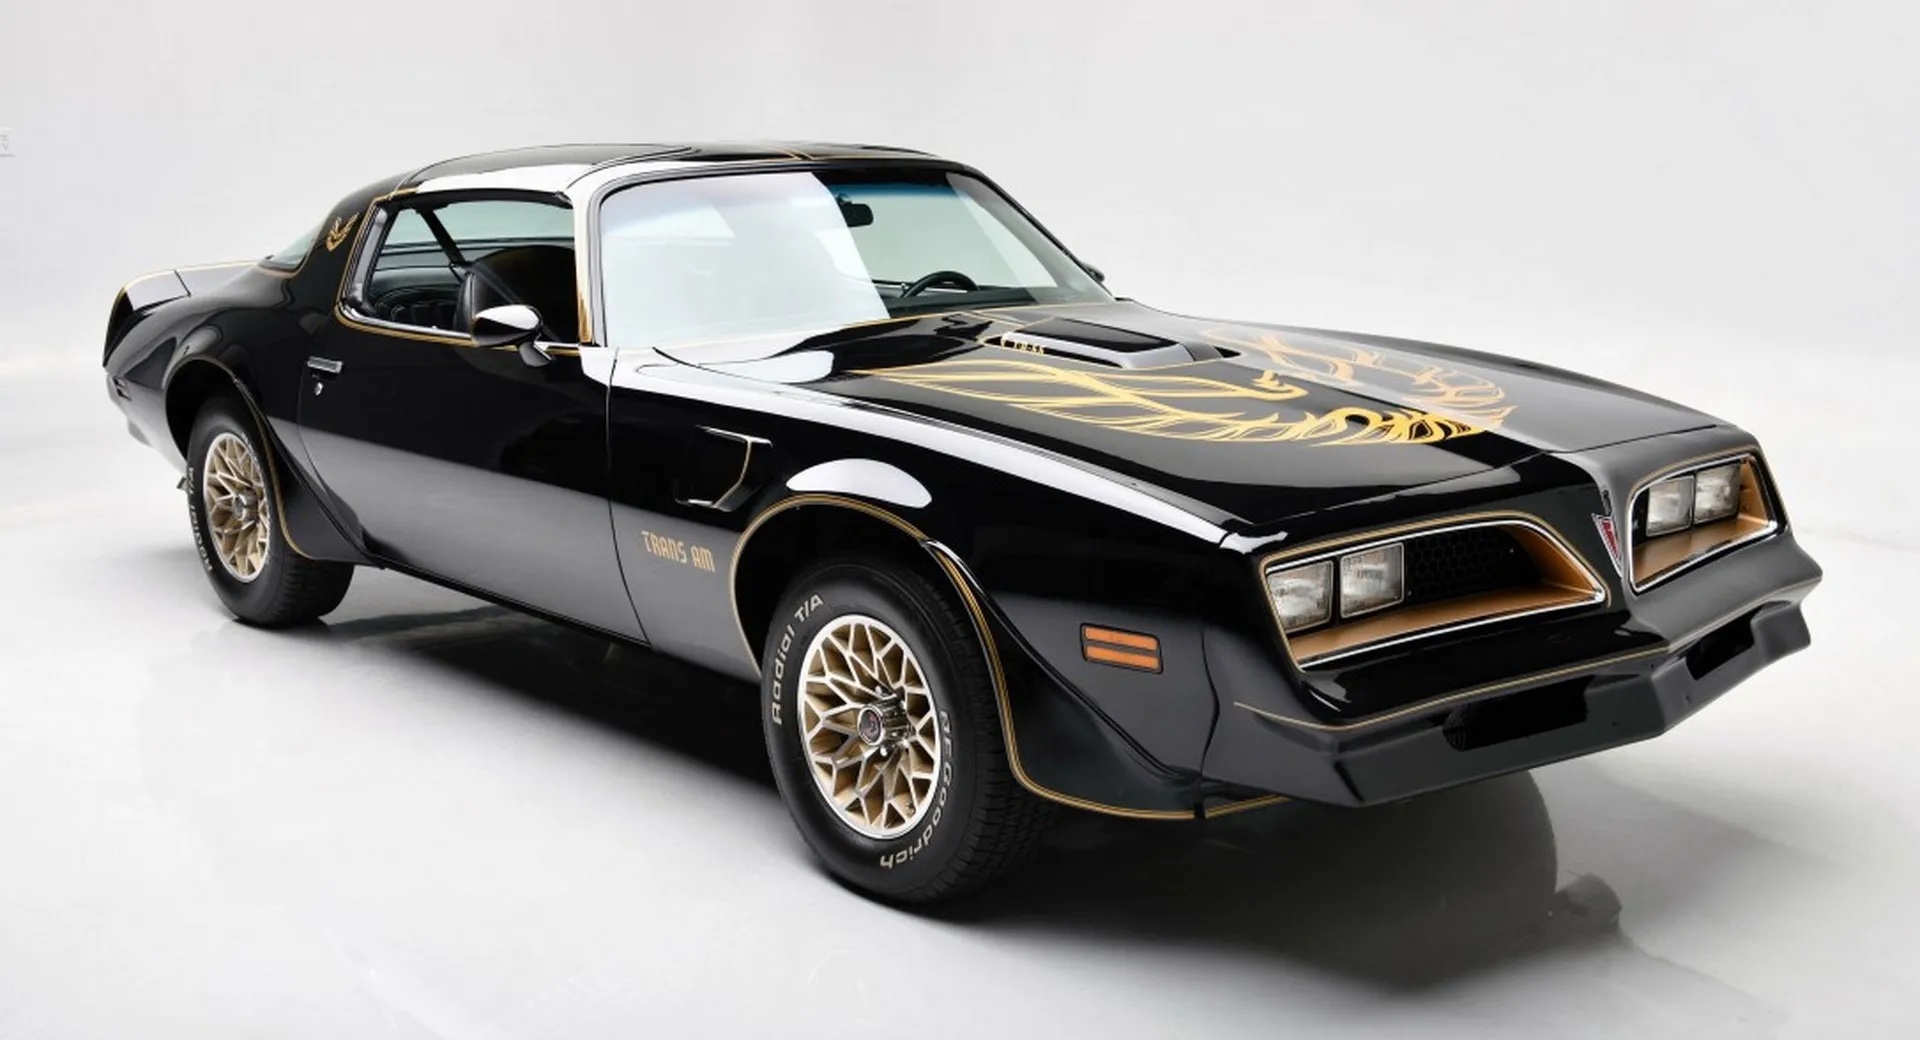 1977 Pontiac Firebird Trans Am SE from Smokey and the Bandit and Owned by Burt Reynolds